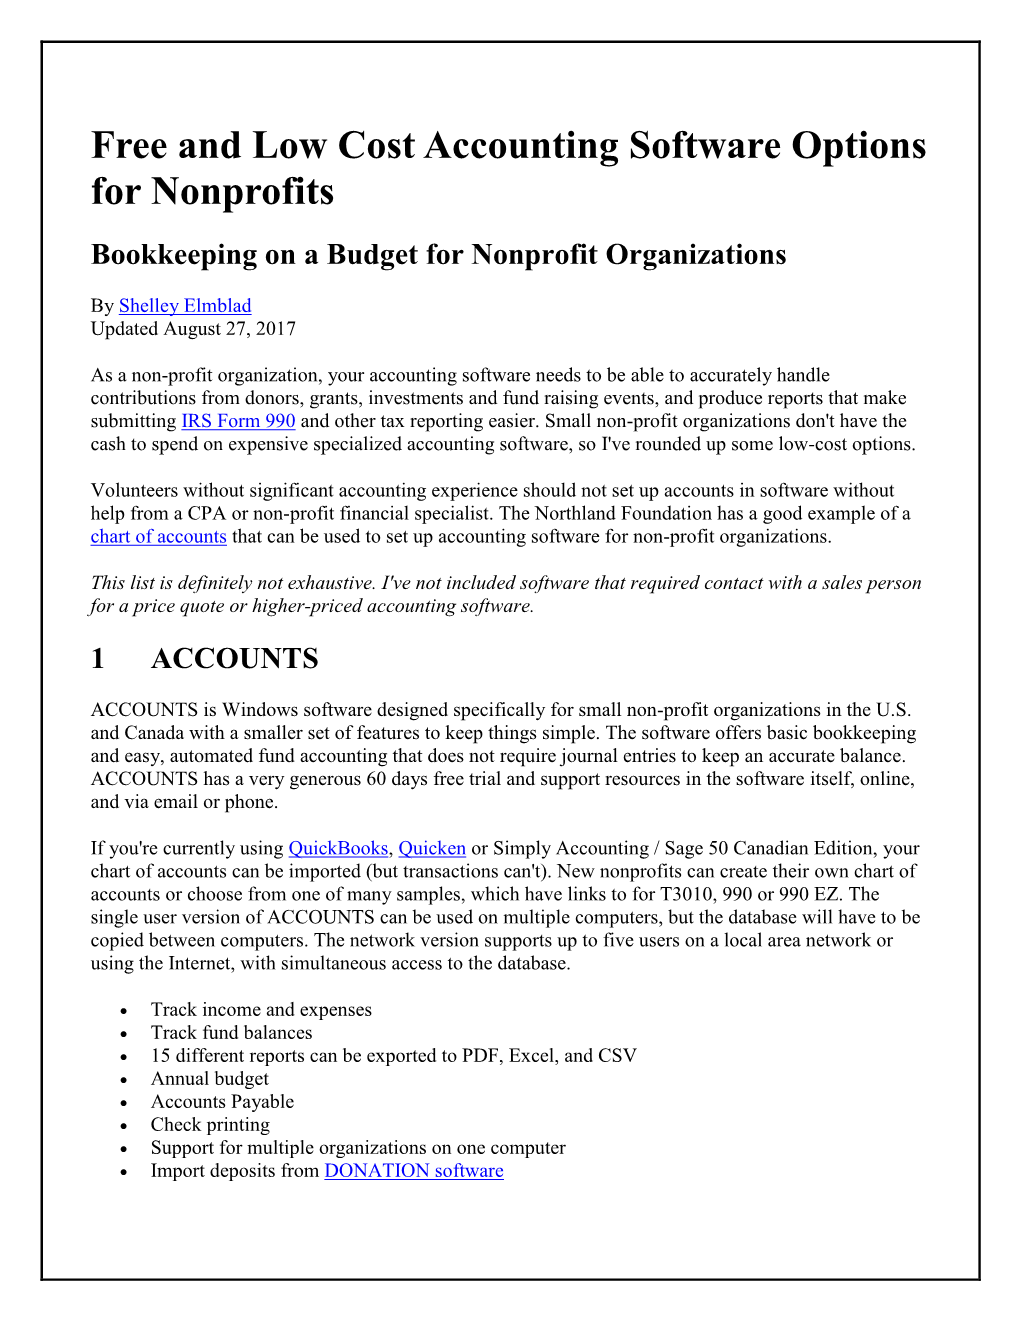 Free and Low Cost Accounting Software Options for Nonprofits Bookkeeping on a Budget for Nonprofit Organizations